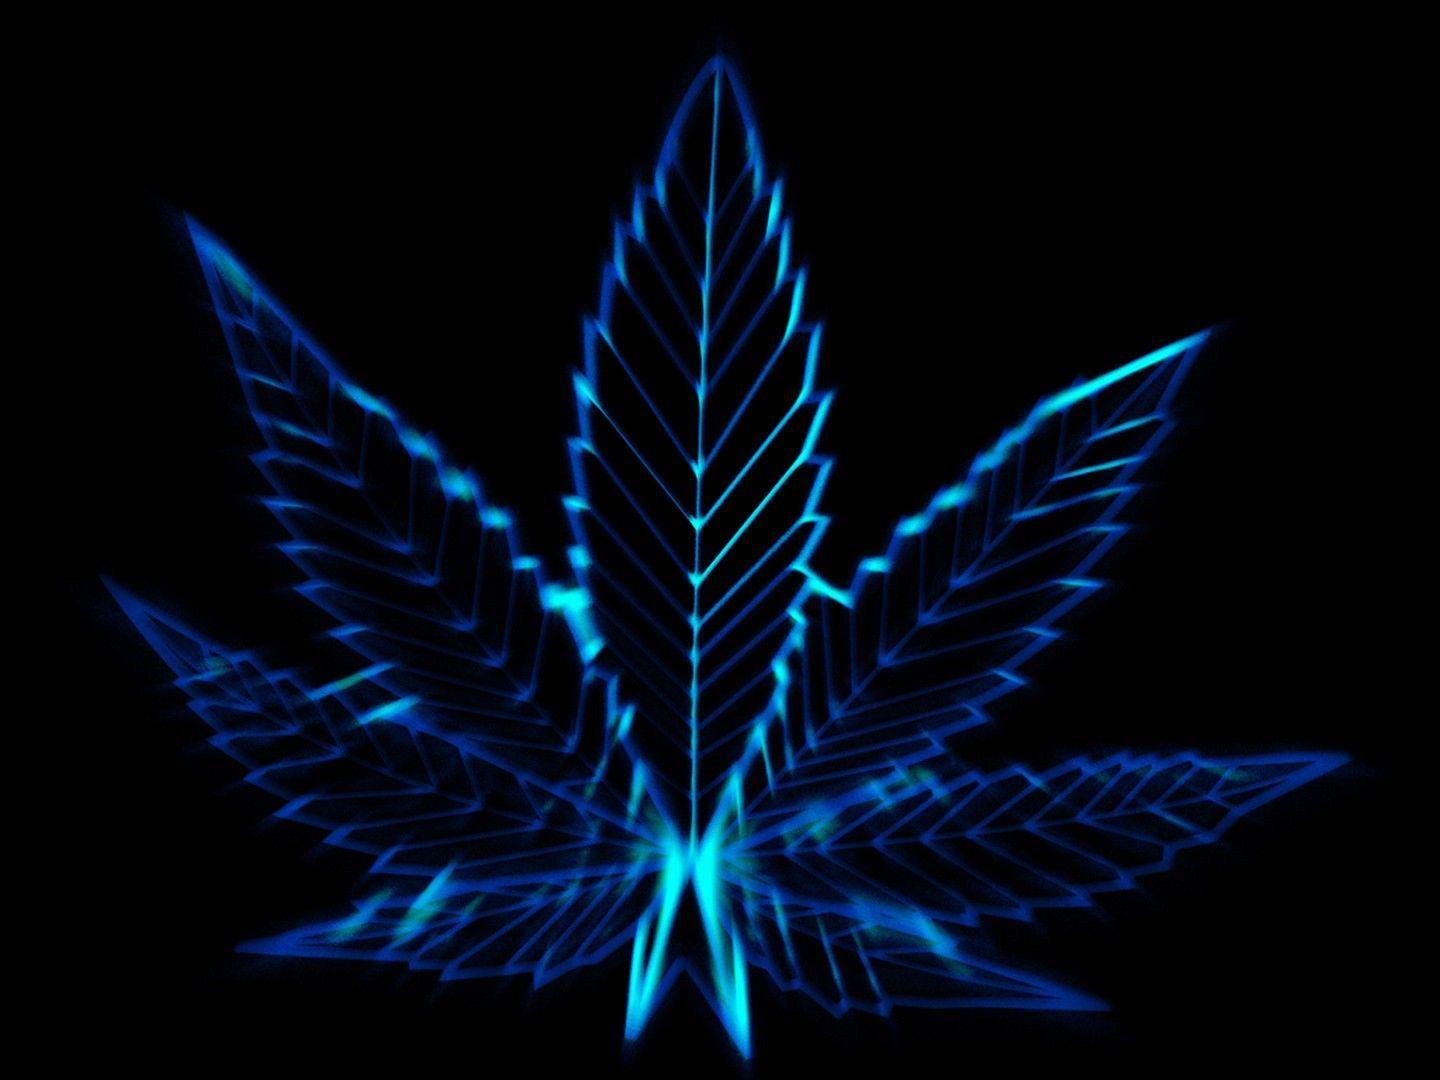 Weed Leaf Wallpapers Blue - Wallpaper Cave